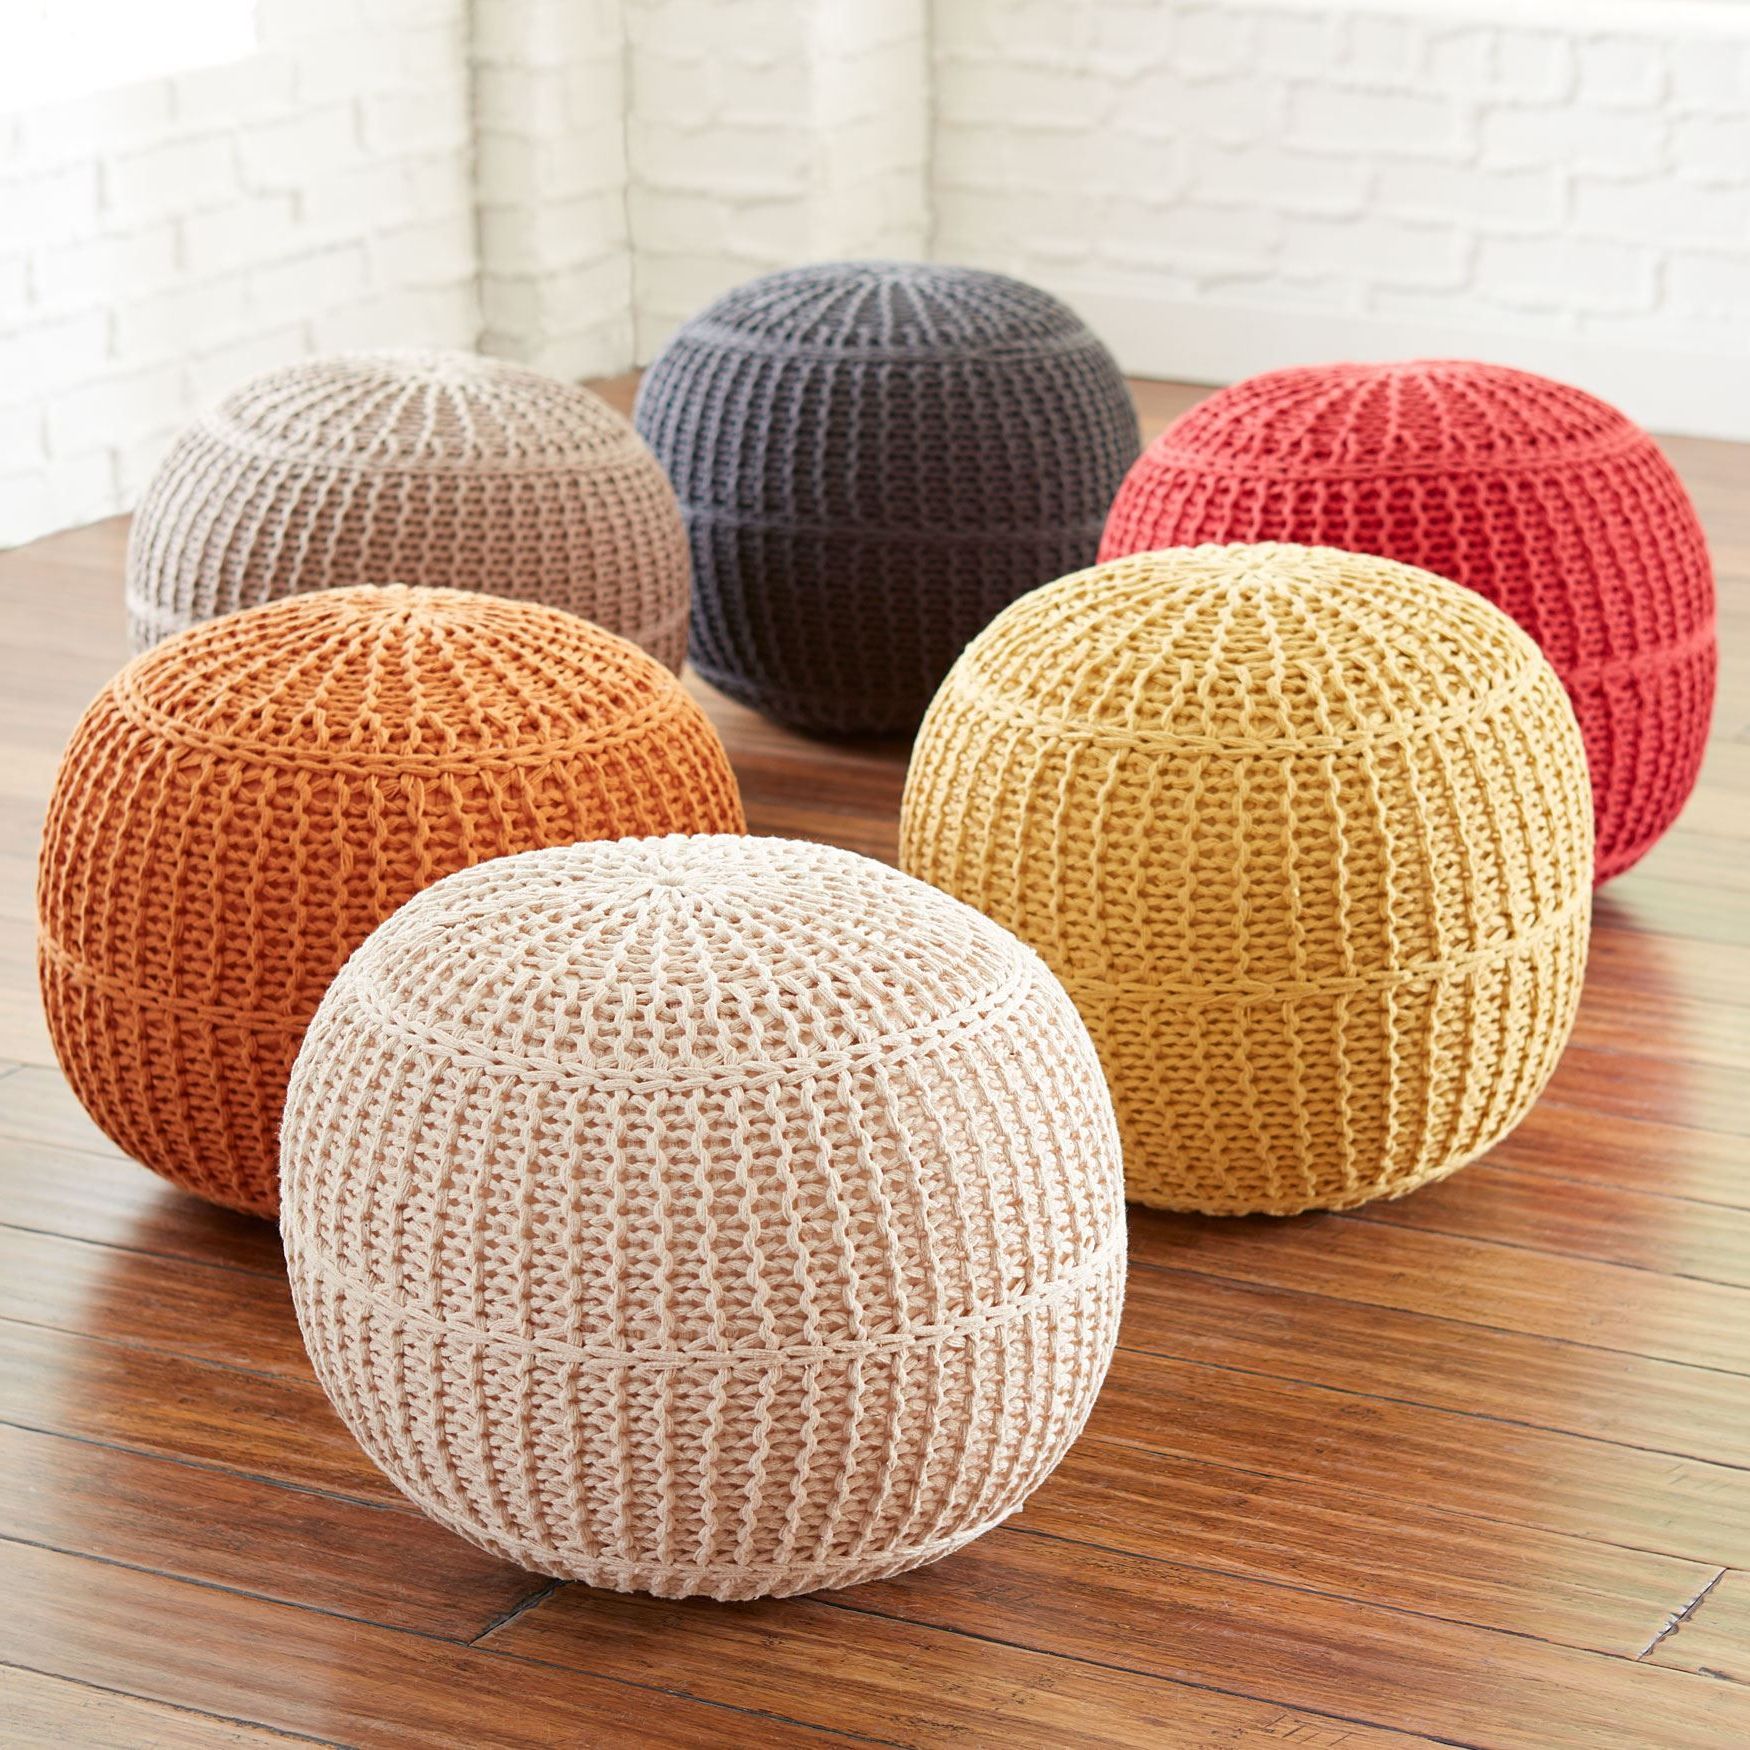 Well Known Cream Cotton Knitted Pouf Ottomans With Regard To Perfect For Propping Your Feet Up, This Hand Knit Cotton Pouf Is Filled (View 1 of 10)